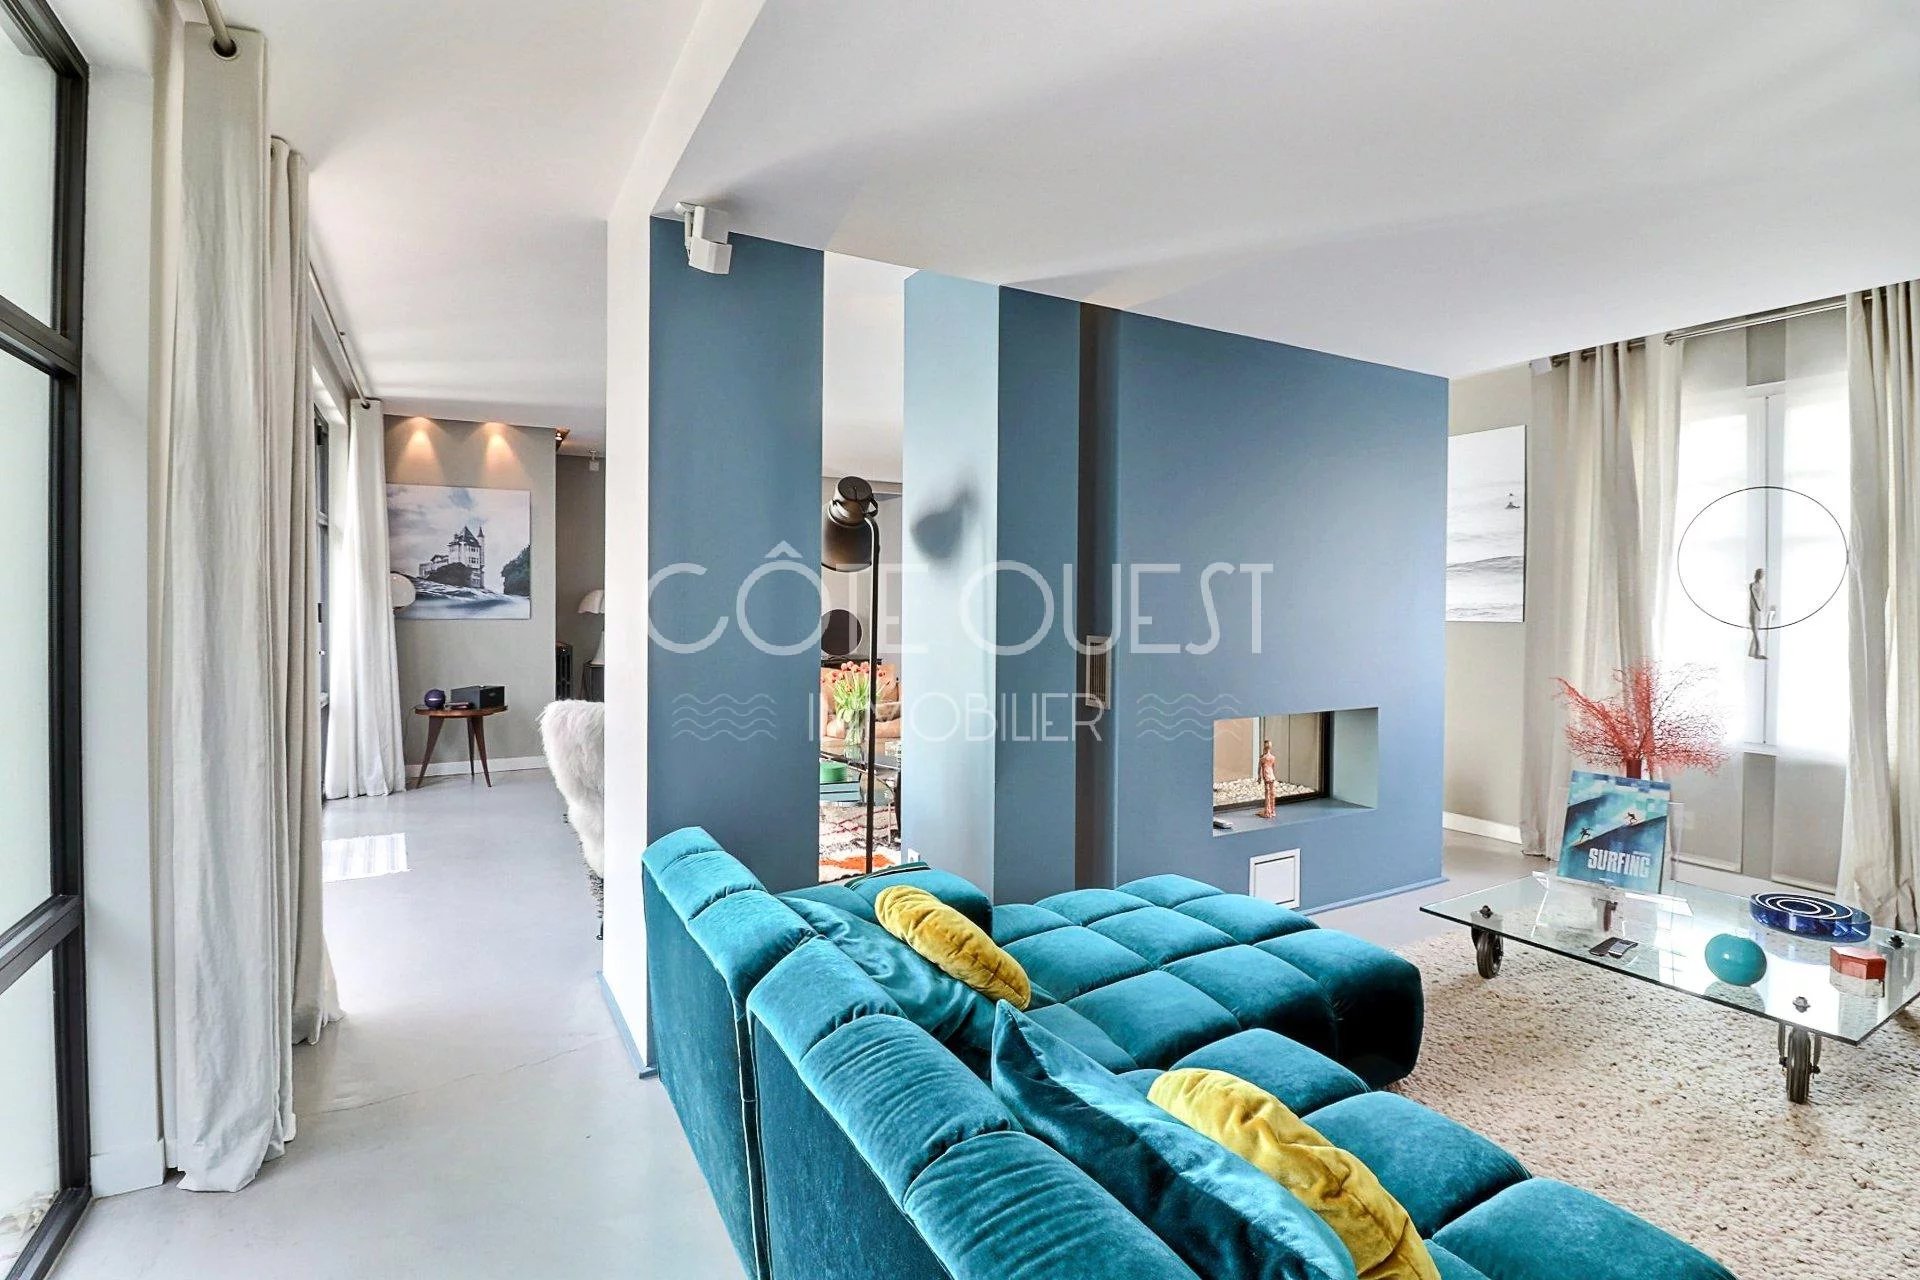 BIARRITZ - A 250 SQM TOWNHOUSE WITH ITS CHARMING GARDEN